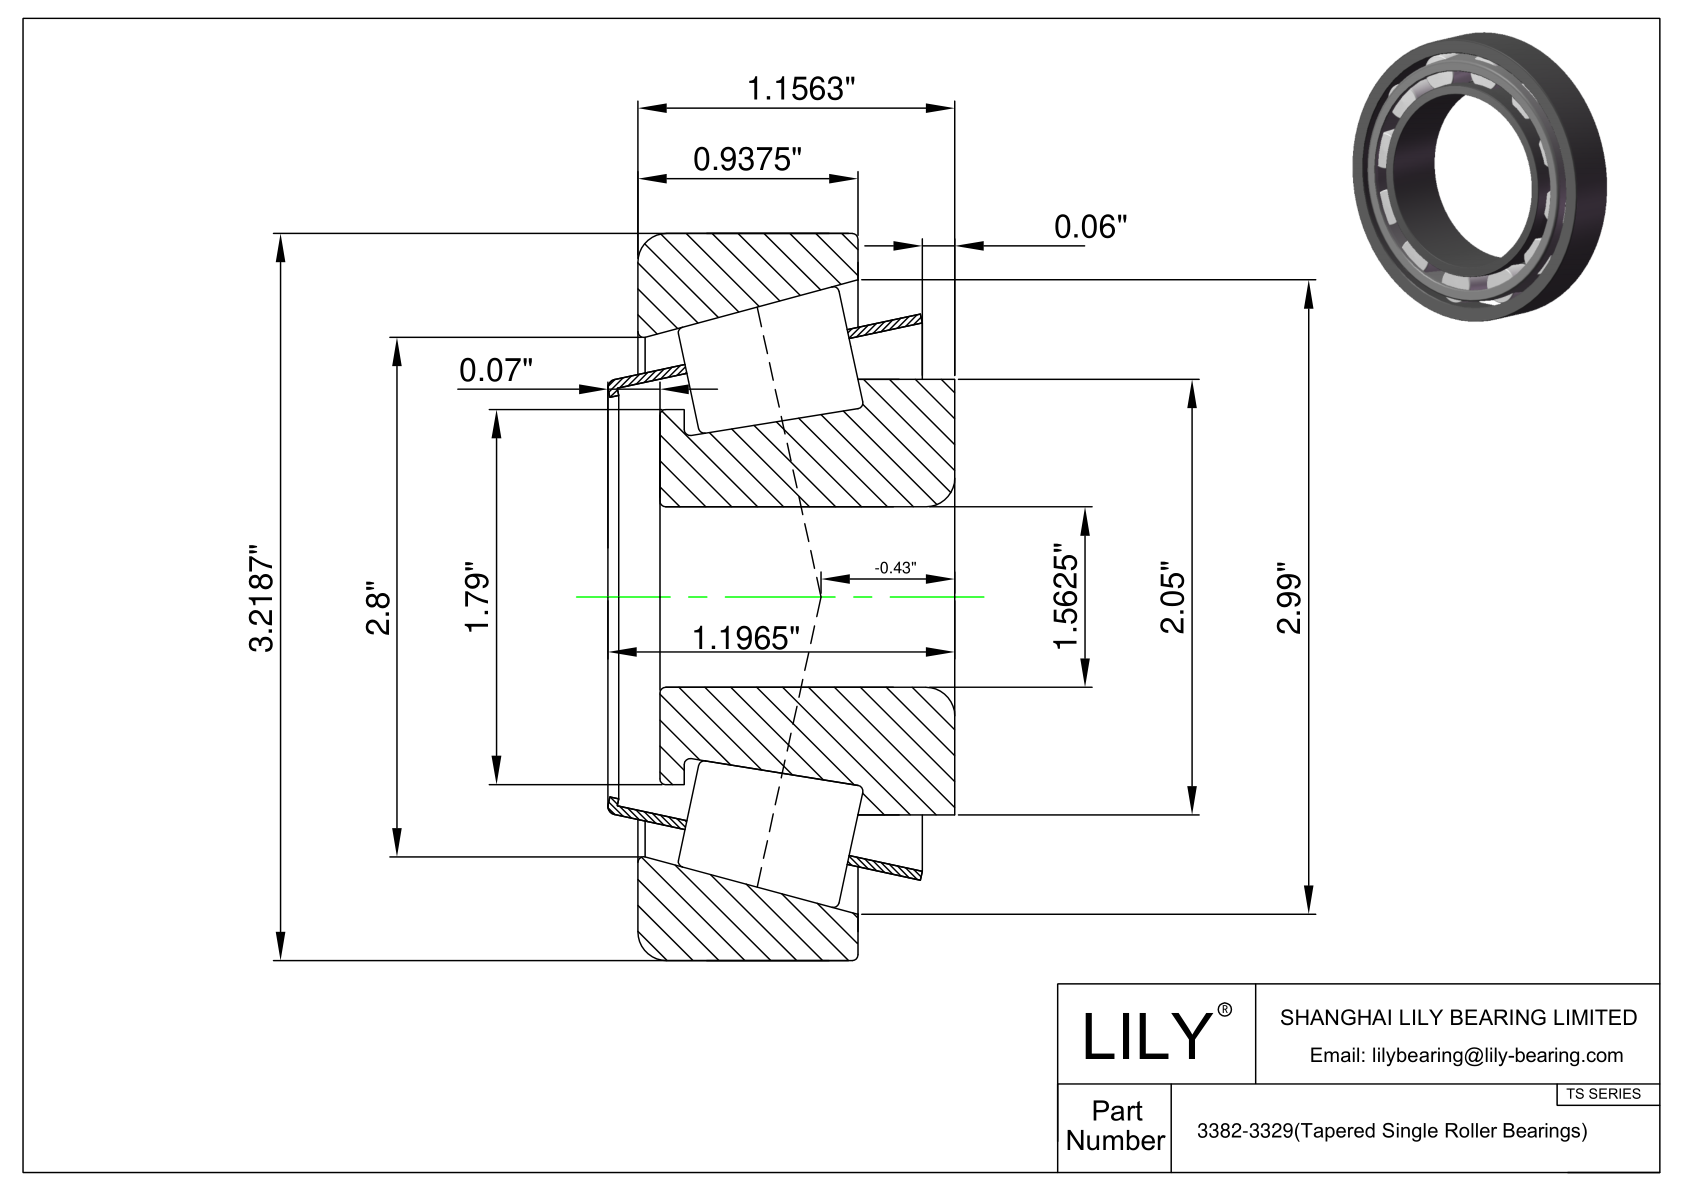 3382-3329 TS (Tapered Single Roller Bearings) (Imperial) cad drawing